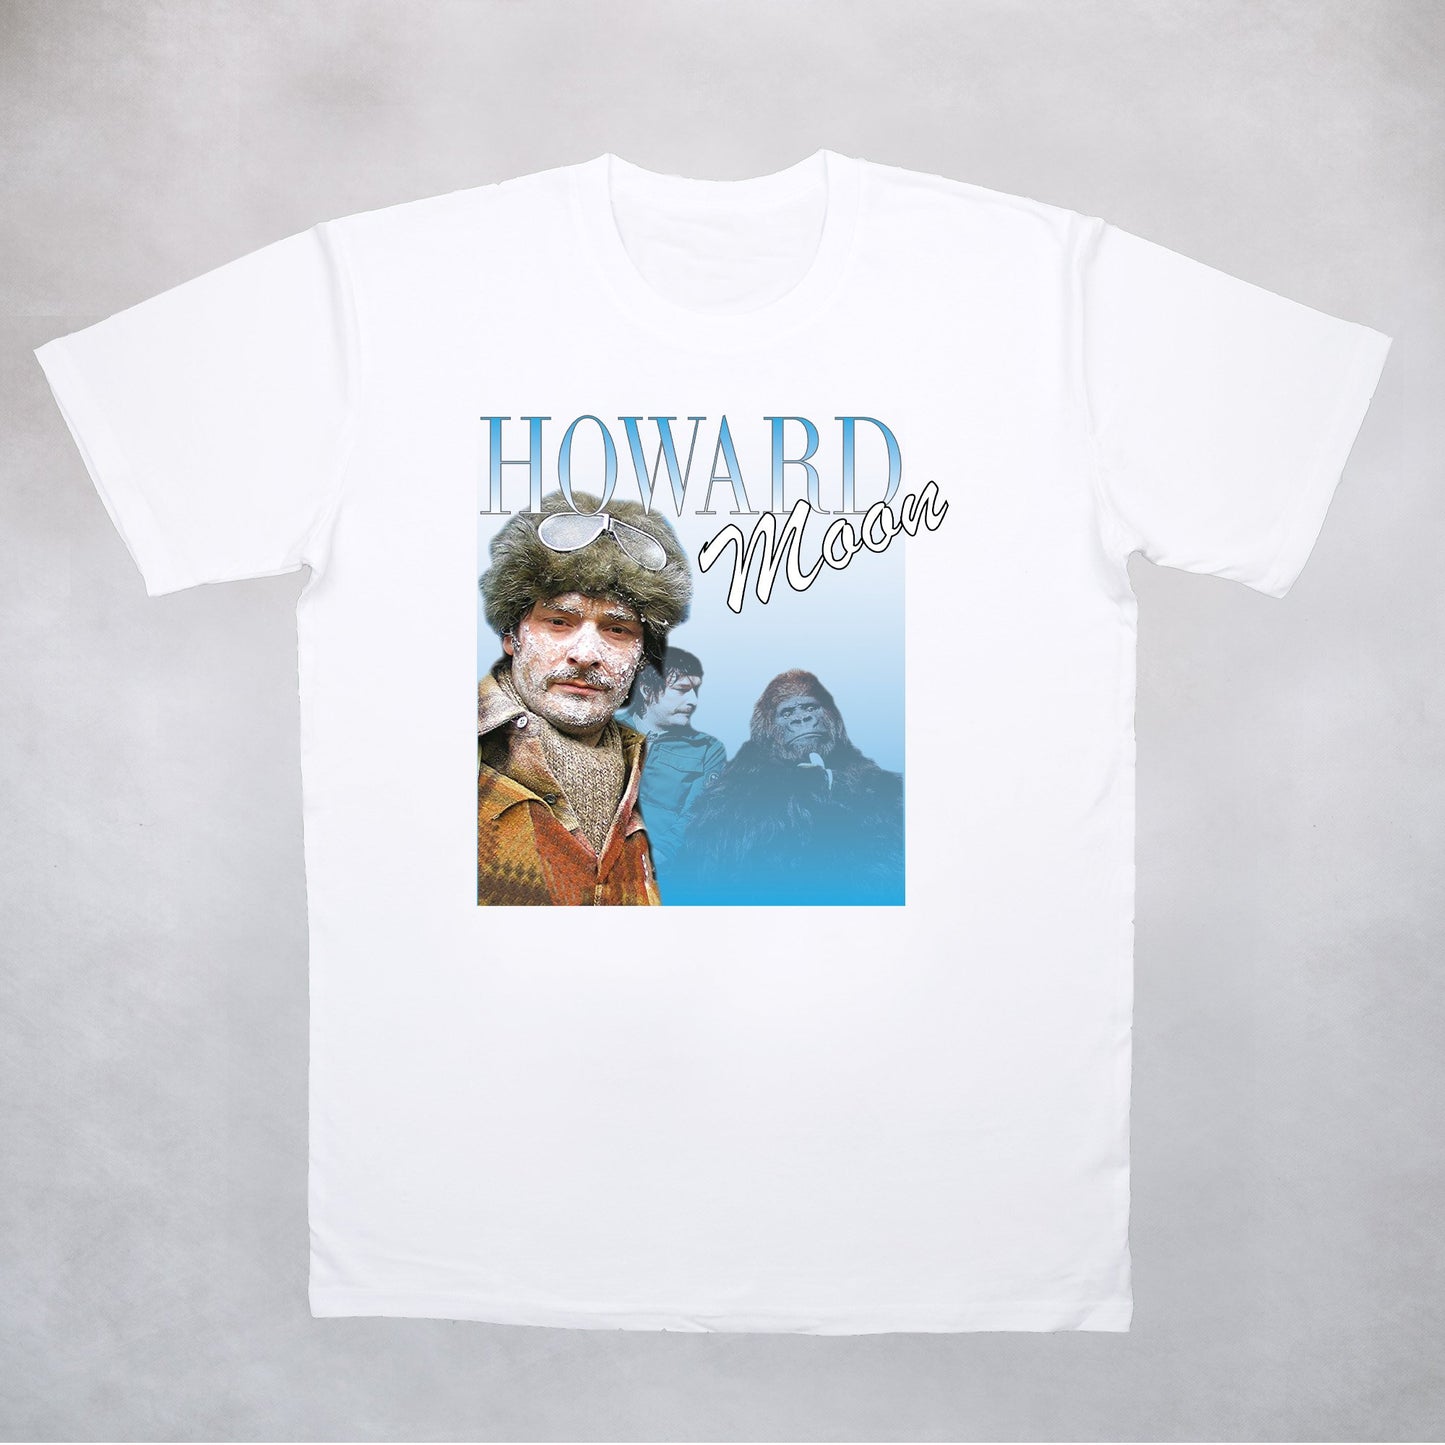 Classy Duds Short Sleeve T-Shirts S / White / Standard Howard Moon Commemorative Classic Tee